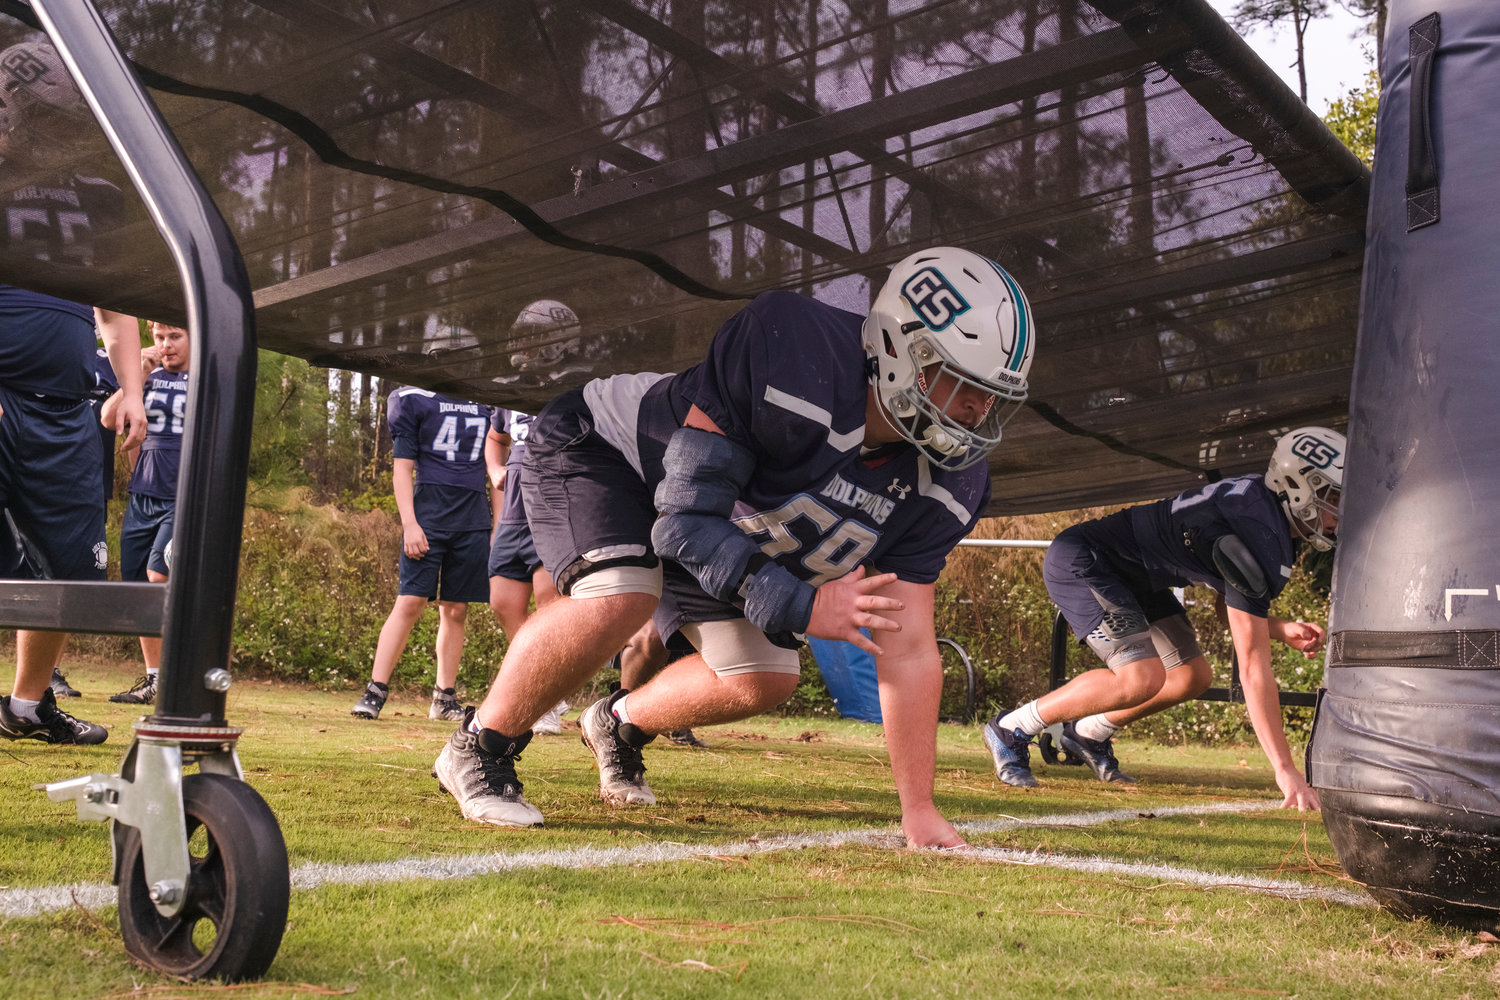 Dolphin senior Jackson Russ lines up for a practice drill Tuesday afternoon at Gulf Shores High School. The Dolphins put in the work as part of state quarterfinal preparations ahead of Friday’s contest against Faith Academy where Gulf Shores is hosting its second playoff game in program history.